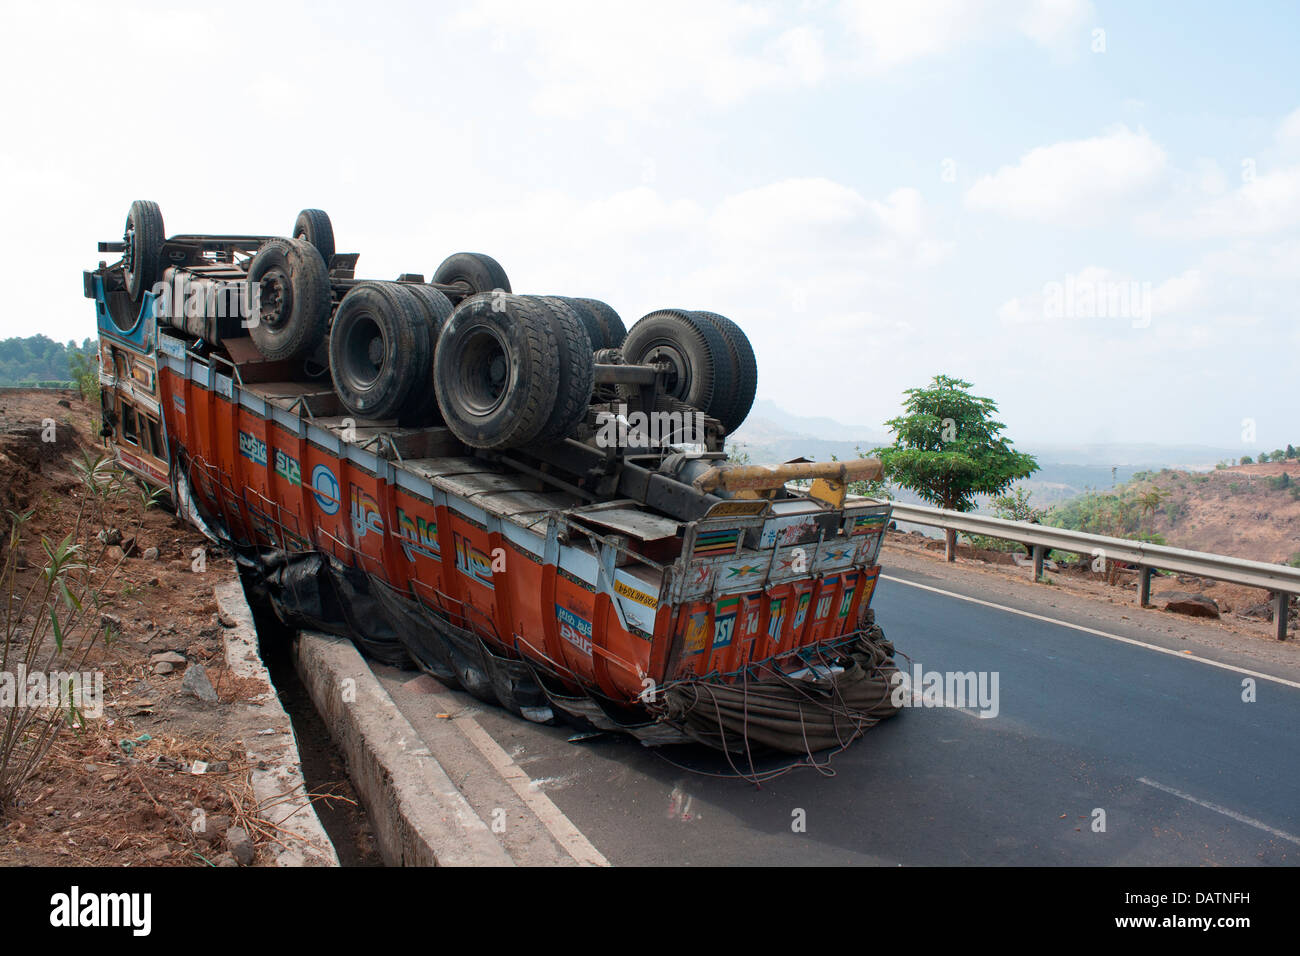 An overturned truck laded with supplies on  Nasik Mumbai Highway prone to road accidents because of poor roads and bad driving. Stock Photo